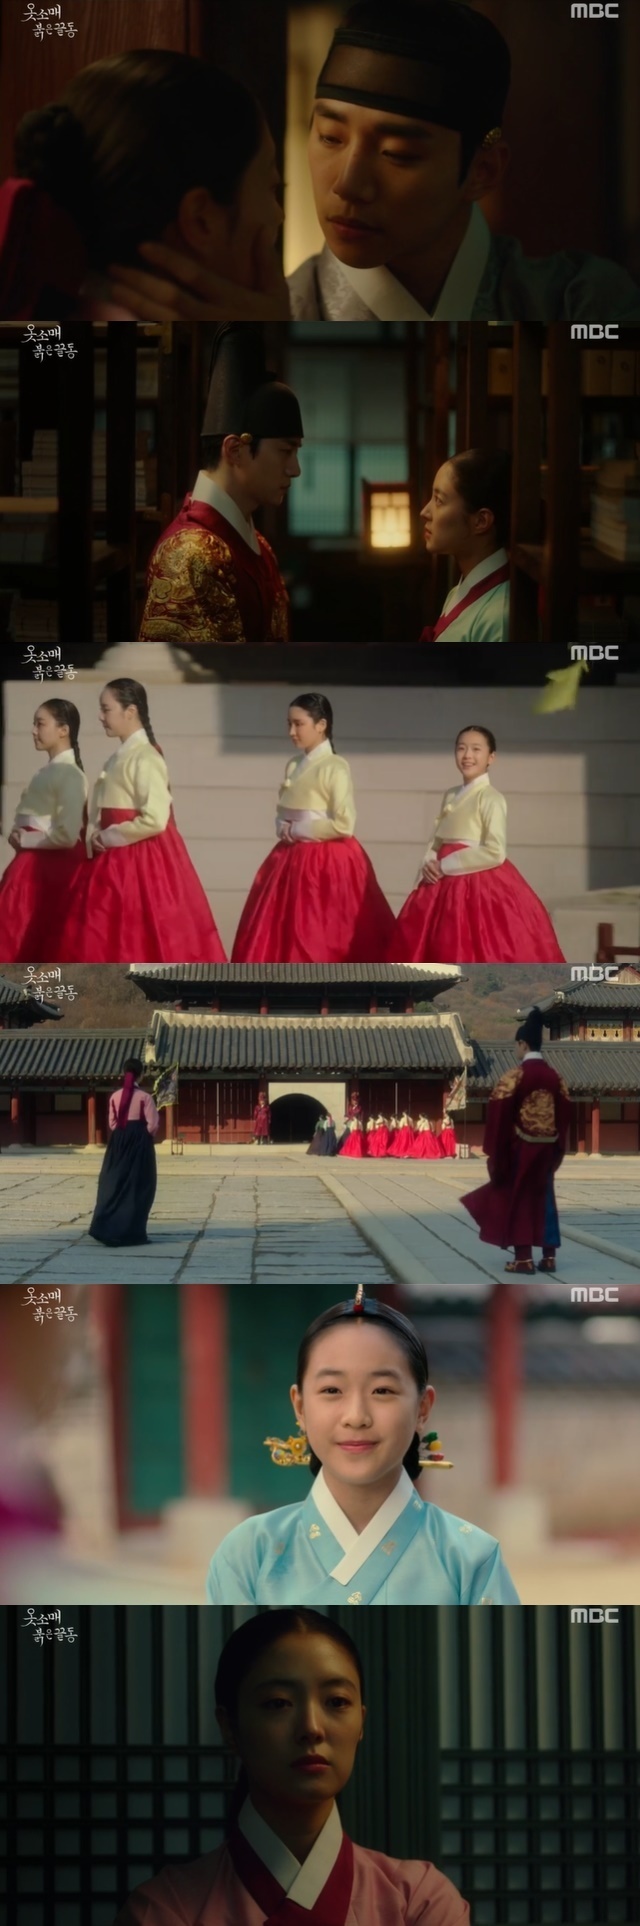 Lee Joon-ho failed to kiss Lee Se-young and propose to her, and Kanghoons sister, Park Seo-kyung, entered the Concubine.MBCs gilt drama The Red Sleeve (playplayed by Jeong Hae-ri / directed by Jung Ji-in and Song Yeon-hwa) aired on December 24, was the throne, but the situation of Lee San (Jeongjo, Lee Joon-ho) was drawn, which can not be done at will.On this day, I did not want to kill the acid silver, and I had to confirm the death of my brother, Eunjeon (the son of Sado Seja, the half brother of Jeongjo).This is because the name of the silver army came out in the marketplace of the station parties that threatened the life of the separated people.This fact shocked Lee and Lee Se-young, who told Lee to look for the leaders without knowing that the Silver Army was involved in the work.Sung Duk-im later told his comrade Son Young-hee (Lee Eun-sam) that I am authorized to kill my brother quickly to the King. I can not say a word by his side.I think Im going to be choked sometimes. Iacid silver In the meantime, I felt that Sungdeokim was avoiding himself more.So I drank a heavy heart drink that killed the acid silver silver army with my hand, and then I burned the honey water and said to Sung Duk-im, I am worried about it.I blame the subject, the person who makes me the hardest. I thought that Iacid silver Sung Duk-im would avoid urging me to be The Concubine.Iacid silver, he said, Youre acting like everyone else these days, youre scared of me like everyone else. Youre reluctant to be next to someone who kills even blood?Youre not lucky today. Its just you and me. I dont think I can remember any of it tomorrow, as you say.If it is a night to be erased anyway, I can do it myself. You will remember, but it is the punishment that it gives you, the crime that dares to push me away. However, the first kiss of the two was not broken, losing their mind just before the lips touched the acid silver liquor.Also, the proposal was a failure.I learned that Sung Duk-im had already expressed his intention to reject The Concubine through dialogue with Jung-jeon Kim and Lee Hye-bin Hong (Kang Mal-geum) along with The Concubine Kang Taek-ryong of Iacid silver Jung-jeon Kim (Jang Hee-jin).I called the acid silver virtue to the fact that I had told Lee Hye-bin Hong first, not myself, rather than the fact that I refused The Concubine, and asked why I did not want to be The Concubine.So Sung Deok-im said, All of mine is gone. If you become The Concubine, you have to give all of me to him.If you give someone everything, you will want to receive it all. But you cannot do that.I would only add to you a trivial woman in your daily life, but I can not go back to the past twice, shaking my entire life.I am afraid of losing, said Sung Duk-im, who said, Do you mean that you are afraid of losing my heart? He said, I am afraid of losing myself.Iacid silver I understood the heart of this virtue.I closed the idea of ​​sitting Iacid silver holy virtue in The Concubine again and promised I will put this thing back for a while.However, Iacid silver seemed to be unable to give up the virtue, saying, I said I would put it on, I did not forget.